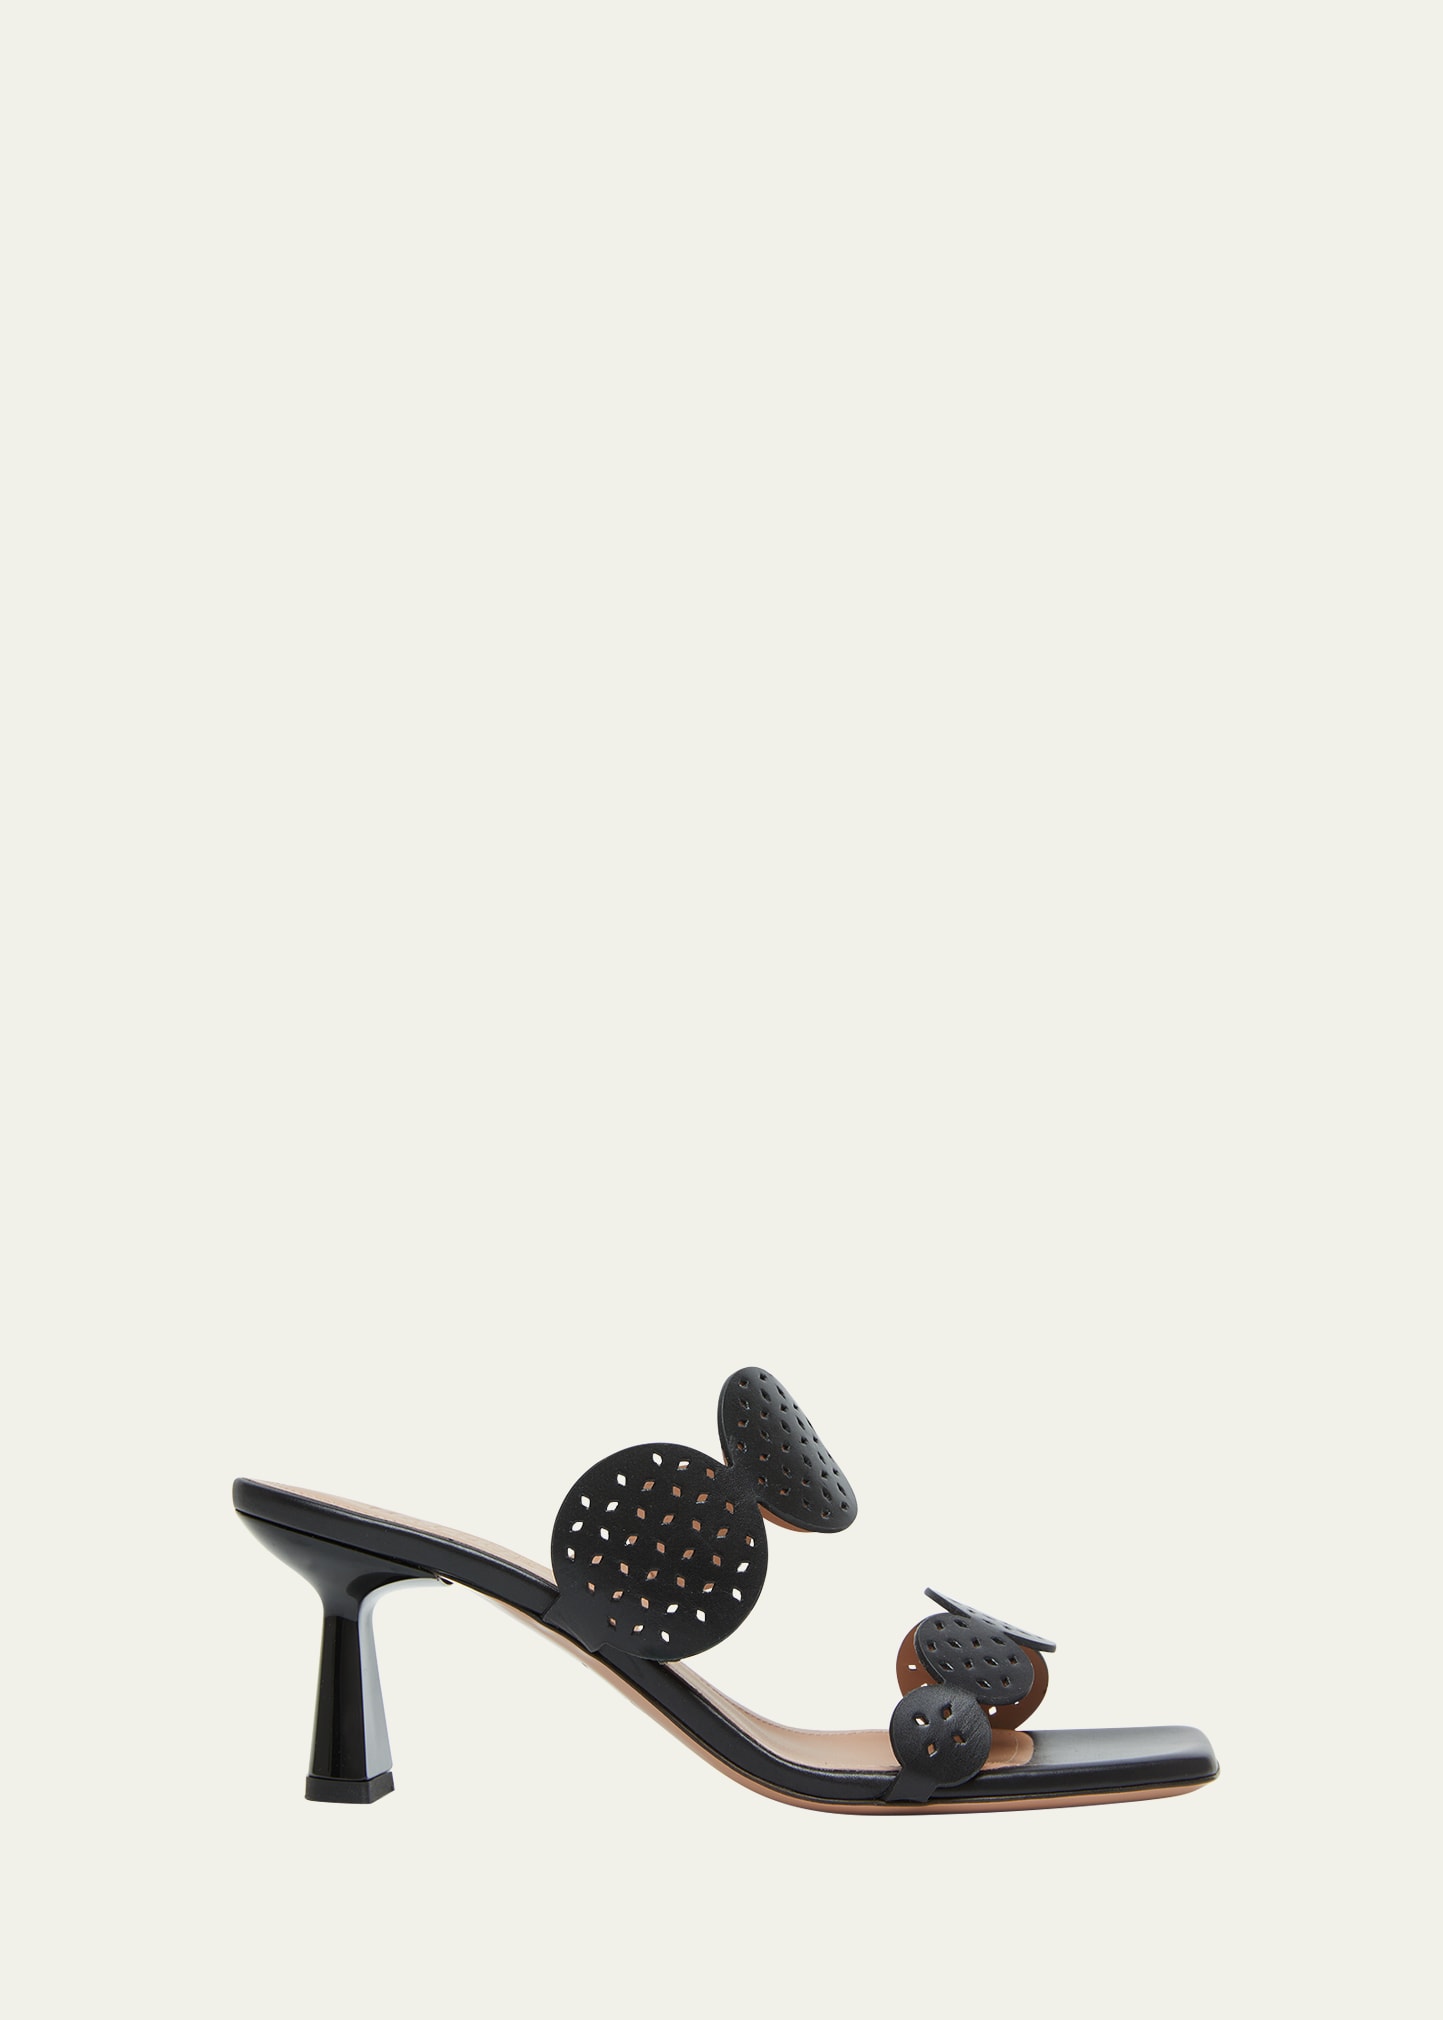 Malone Souliers Trish Perforated Leather Mule Sandals In Black